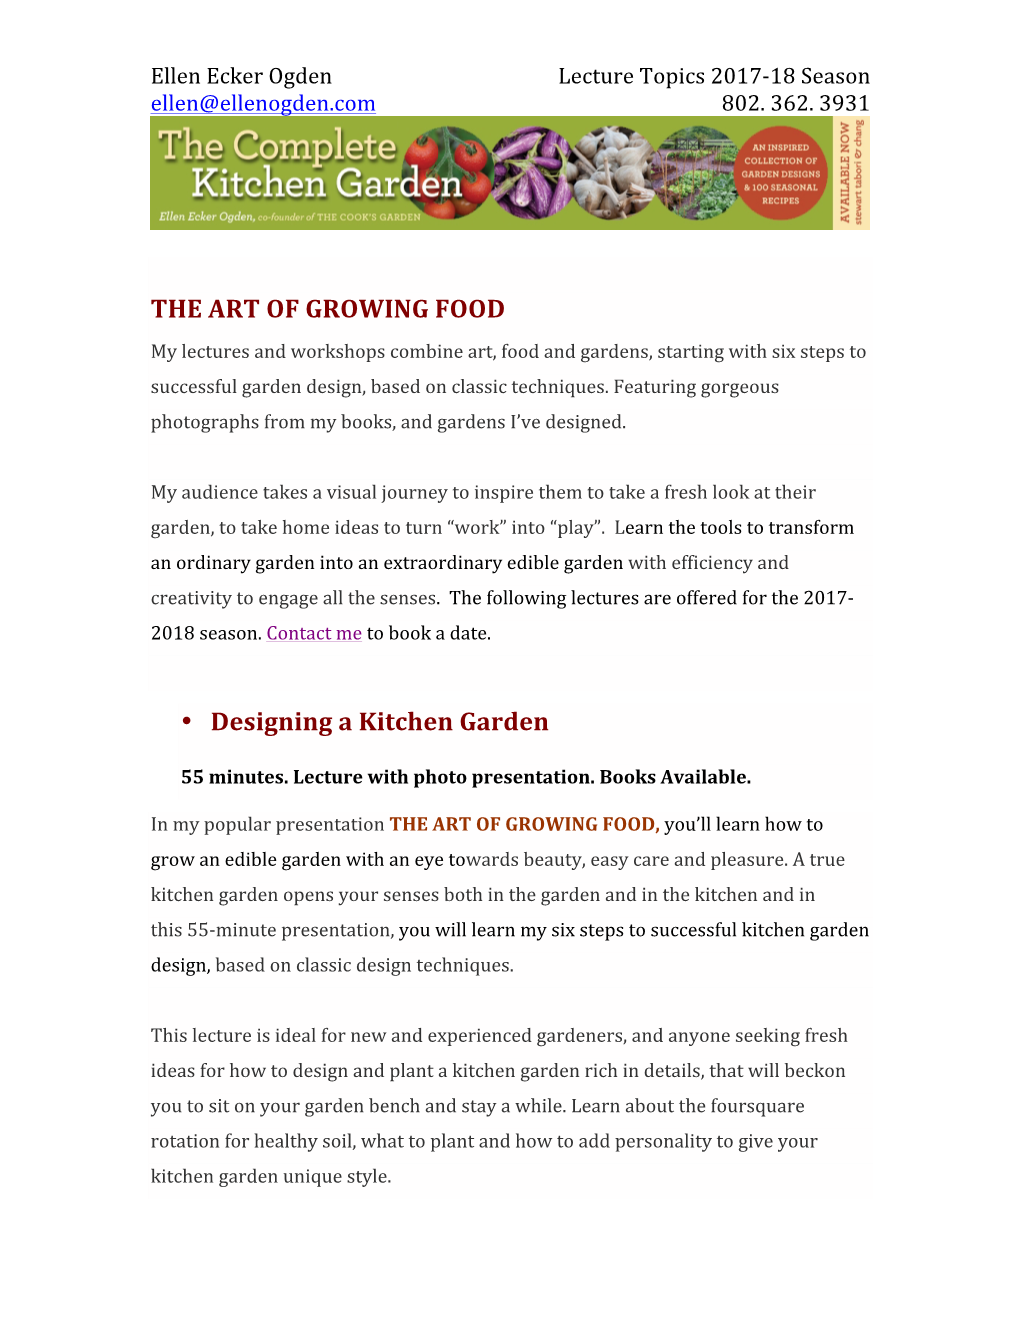 THE ART of GROWING FOOD • Designing a Kitchen Garden